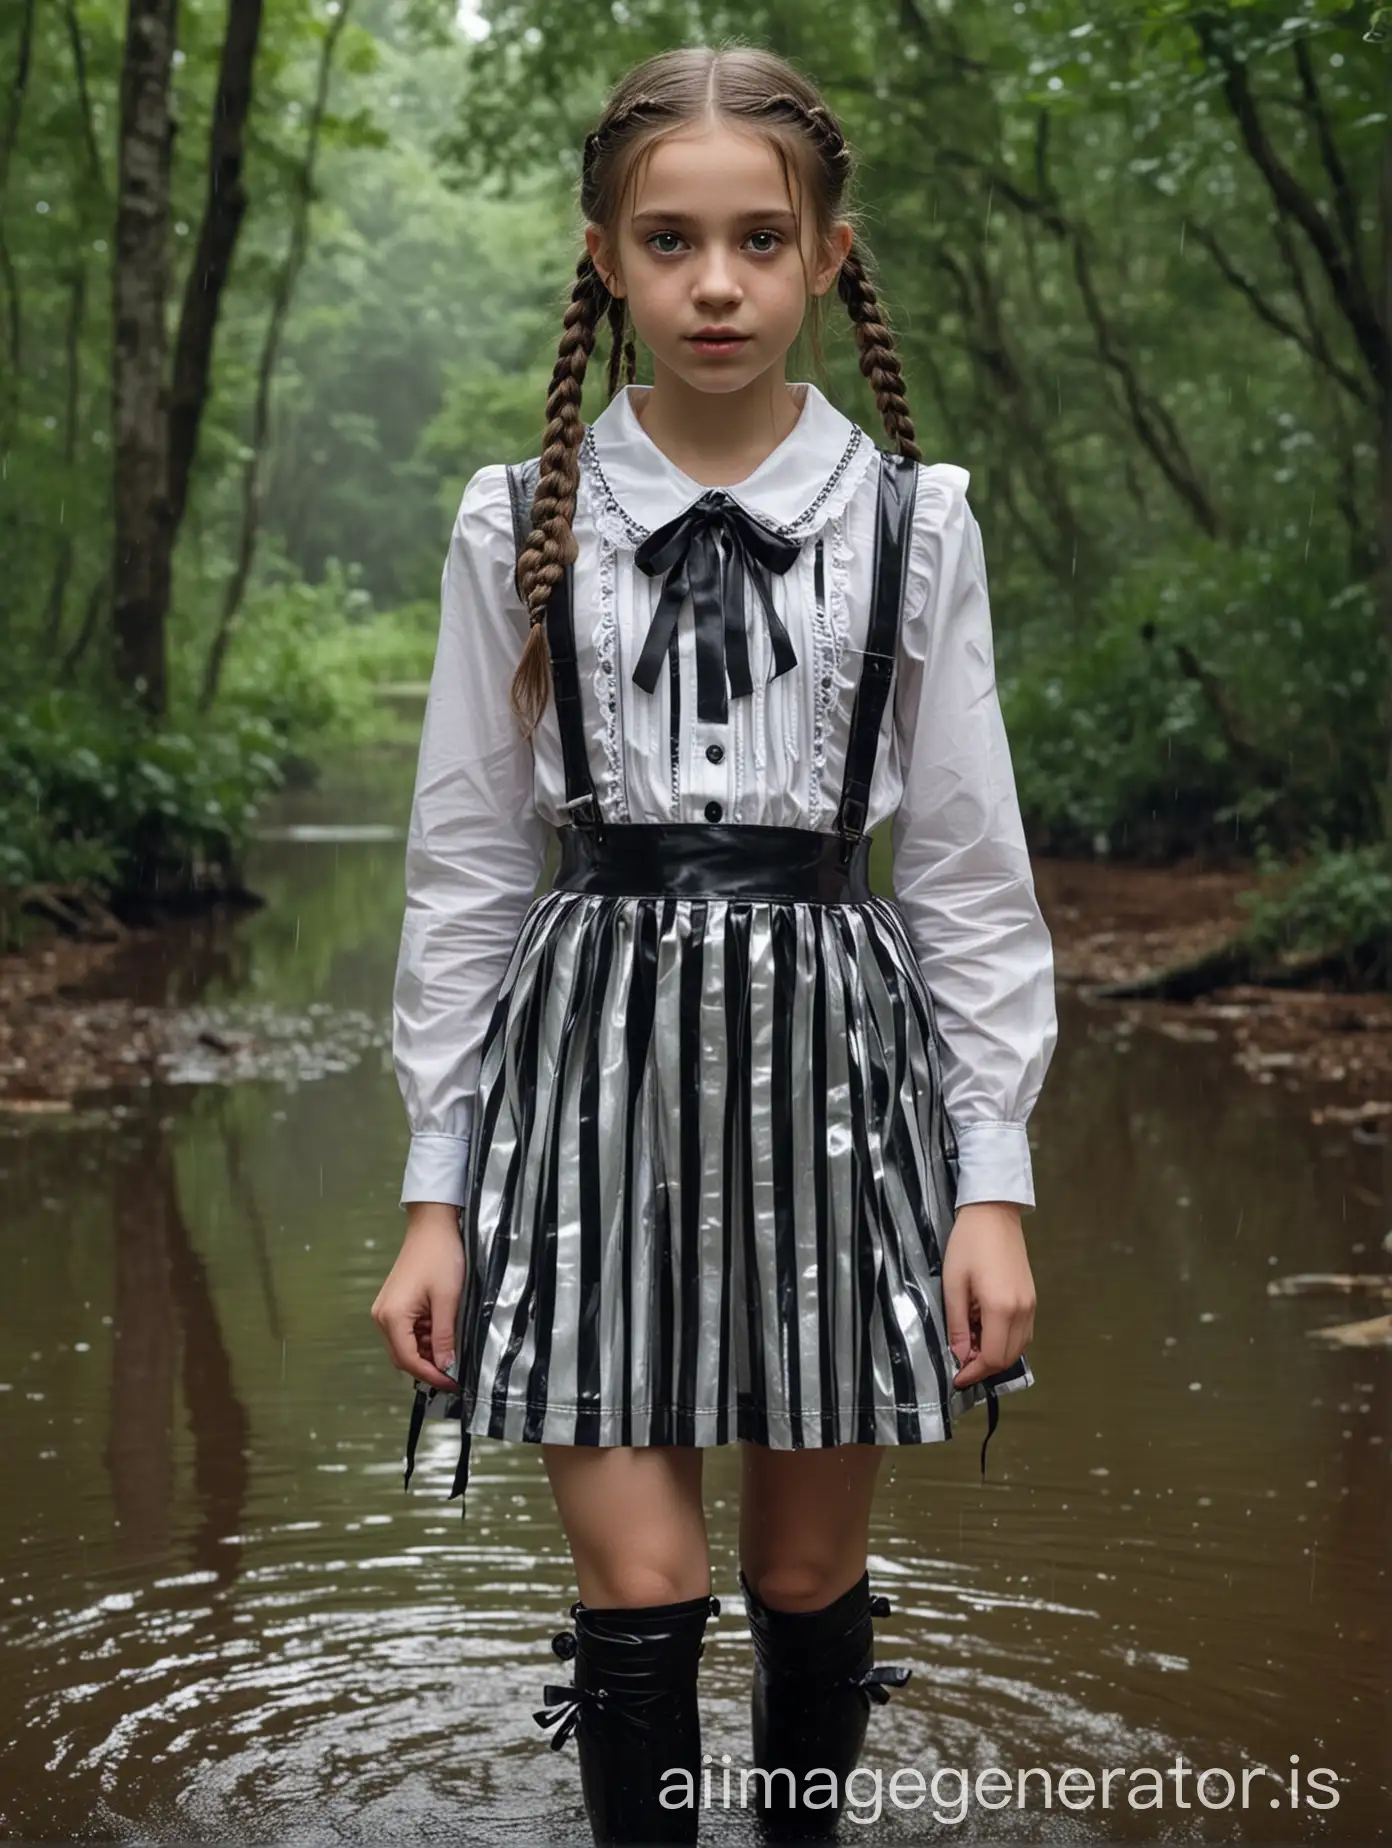 Ultra-Realistic-Photo-of-a-Pale-Jewish-Ultraorthodox-Girl-Stepping-out-of-a-Forest-Lake-in-Summer-Rain-Wearing-a-Shiny-Satin-Sweet-Lolita-Outfit